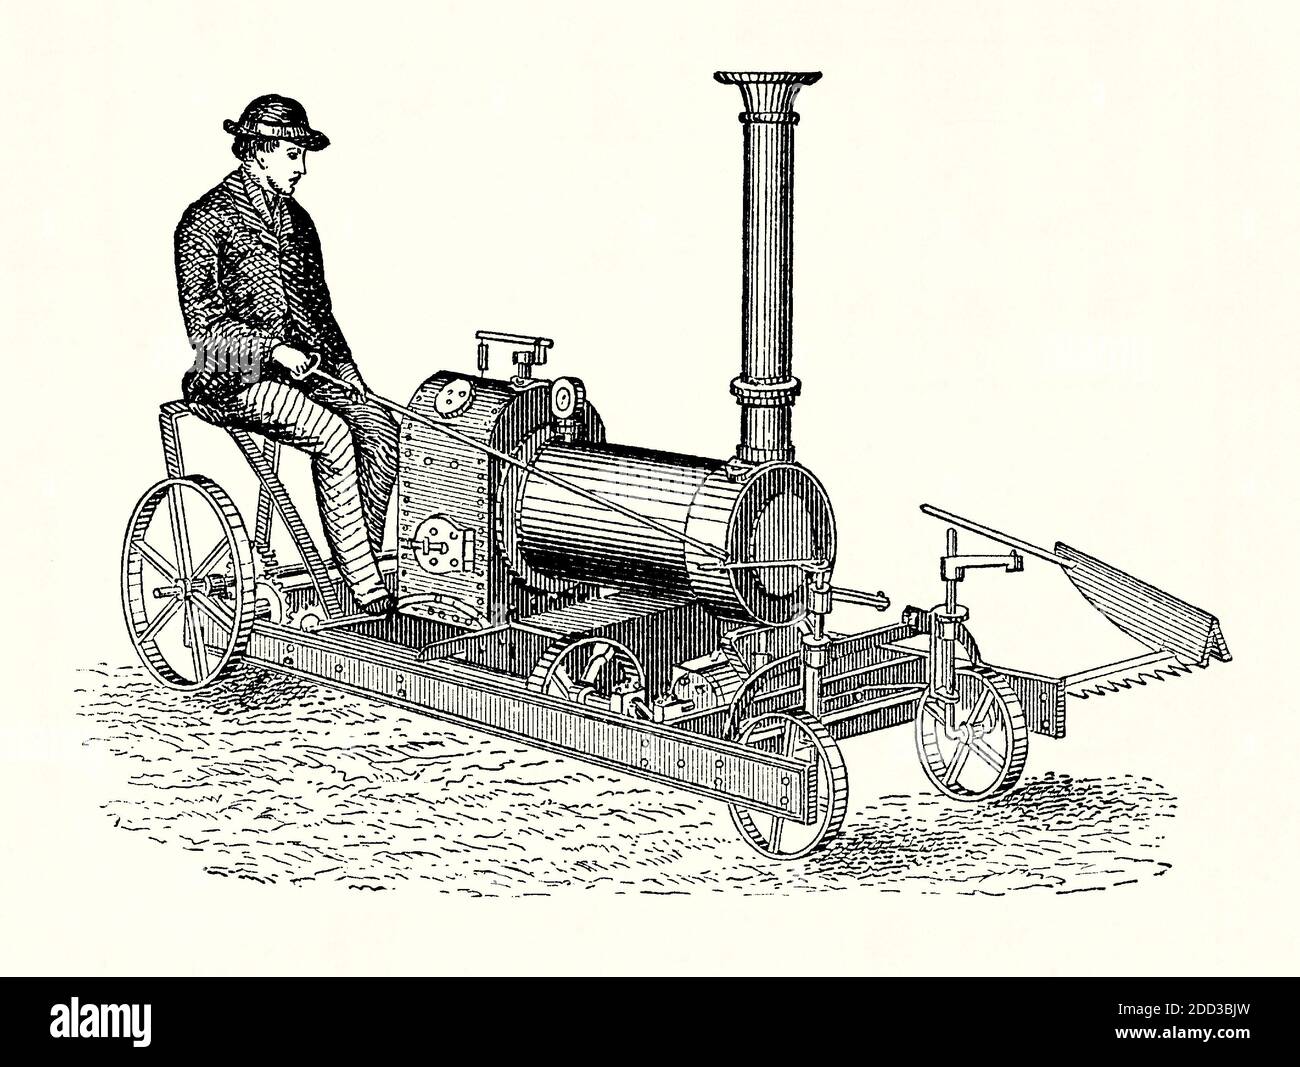 An old engraving of a steam powered lawn-mower. It is from a Victorian mechanical engineering book of the 1880s. The lawn mower was invented by Englishman Edwin Beard Budding in 1830. His hand-mower was for cutting grass on sports grounds. As an alternative to the scythe, it could cut closer to the ground. Horses were used to pull larger mowers a decade later and steam-powered lawnmowers were introduced in the 1890s, but were heavy and bulky machines. It seems this earlier illustration of a small steam-powered mower is probably an artist’s impression rather than a machine that was manufactured Stock Photo